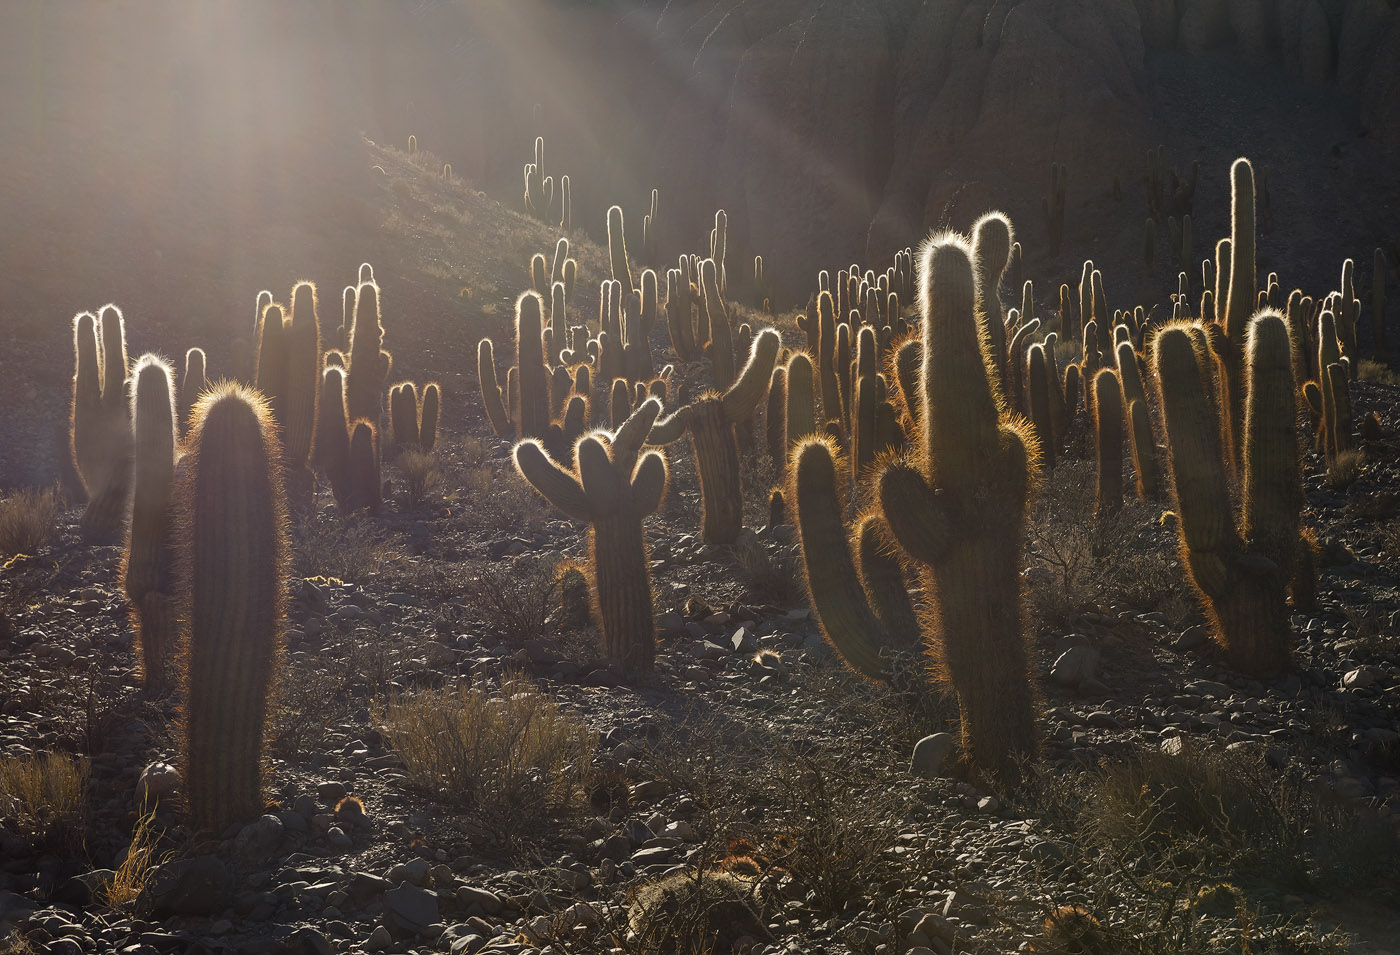 I found this cactus field at the roadside when driving in the Argentinean Puna. When realizing the sun was about to rise and back–light the cacti, I decided to stay and shoot some of the infinite compositions the field offered in wonderful light conditions.<br>Canon EOS 5D Mark IV, Tamron 24–70mm, f/14, 1/125 sec, ISO 100